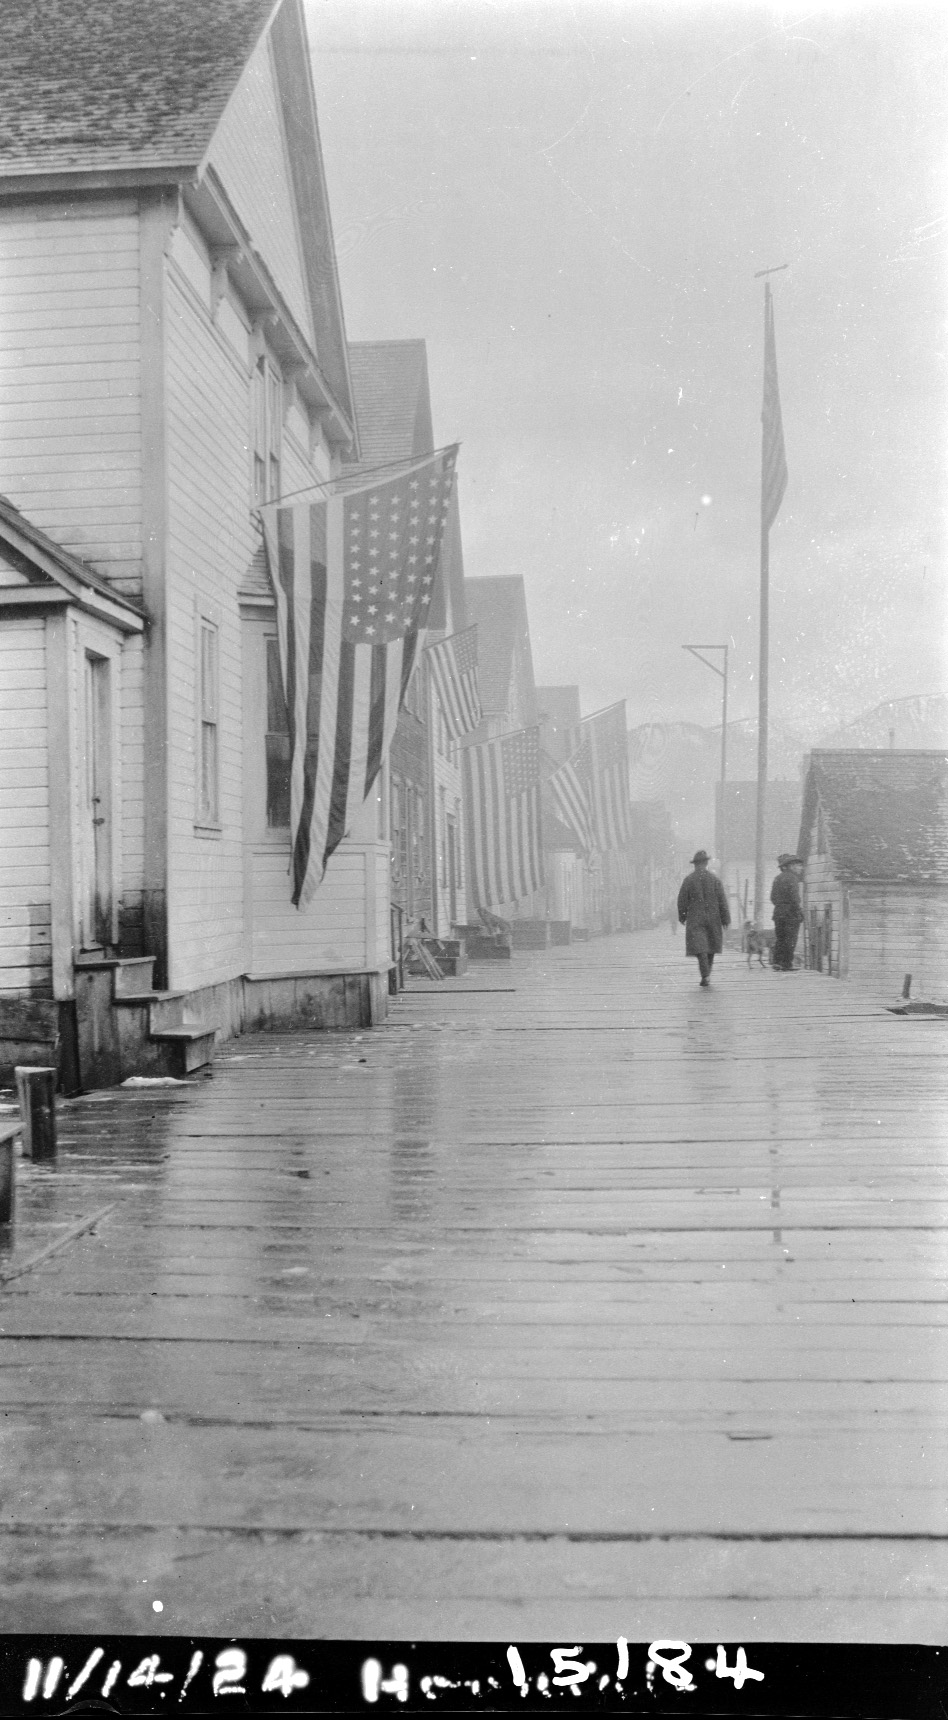 Nov. 14, 1924 Town, probably Haines, with American Flags